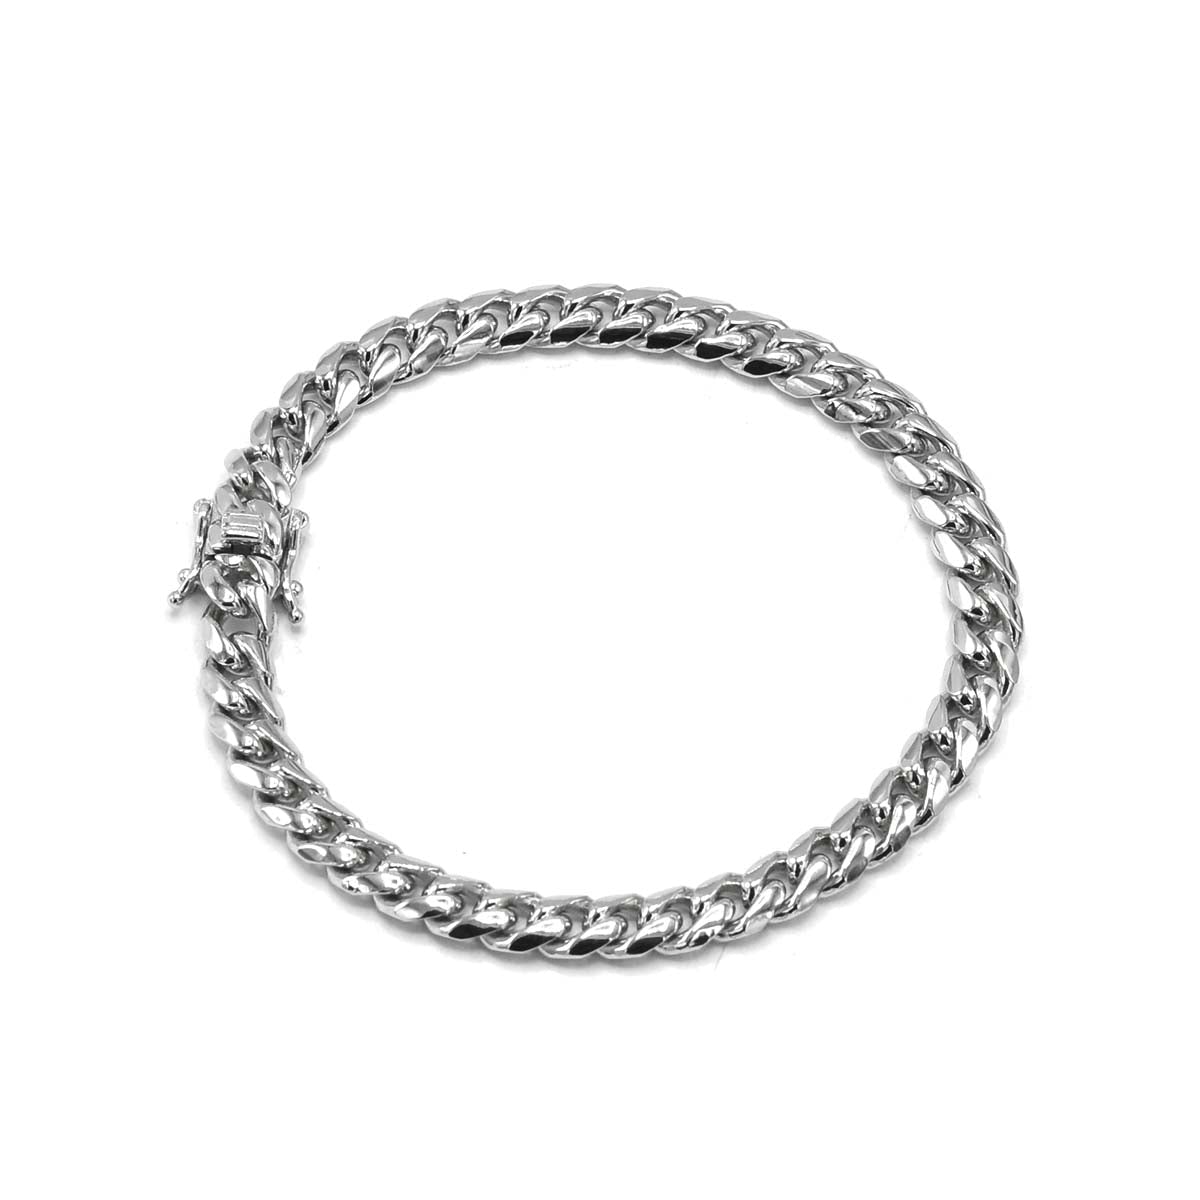 STNB-10 925 Silver Plain Cuban Chain 10mm 18" 20" 22" 24" 7" 7.5" 8" Price by Weight